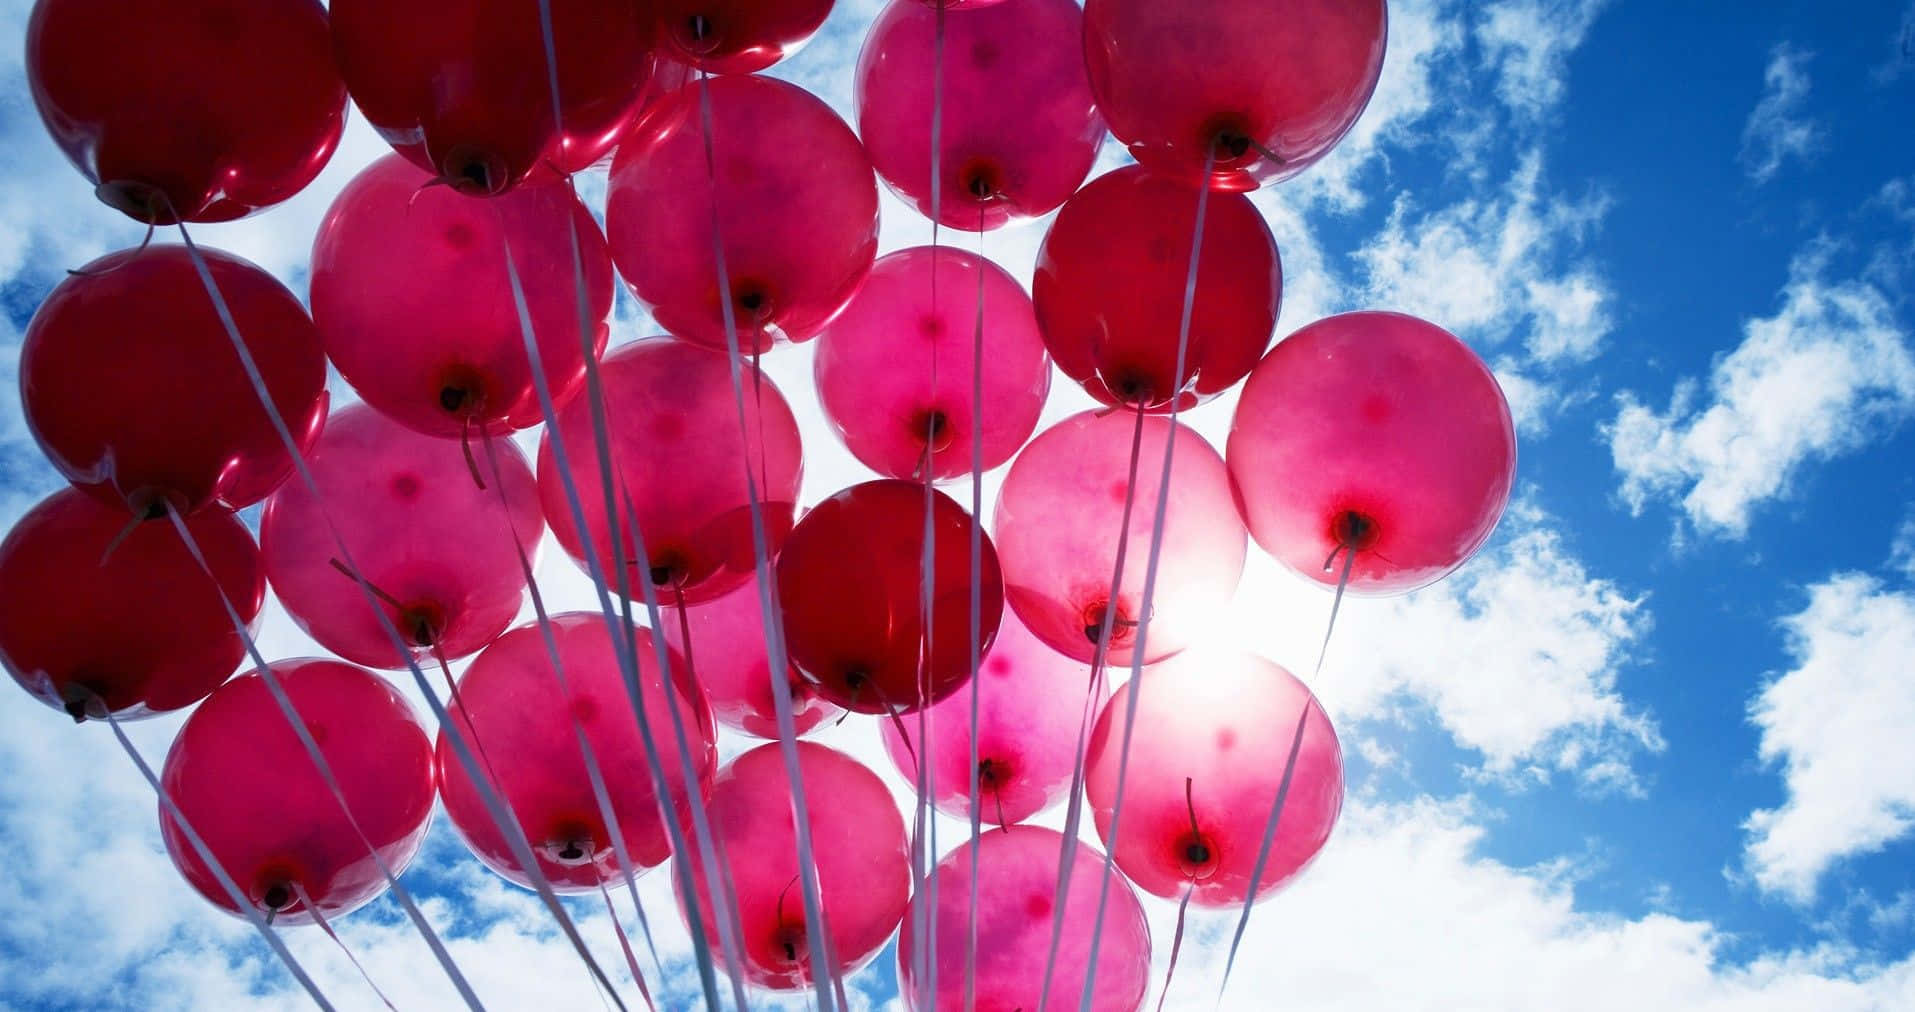 Add color to your celebration with beautiful Pink Balloons!